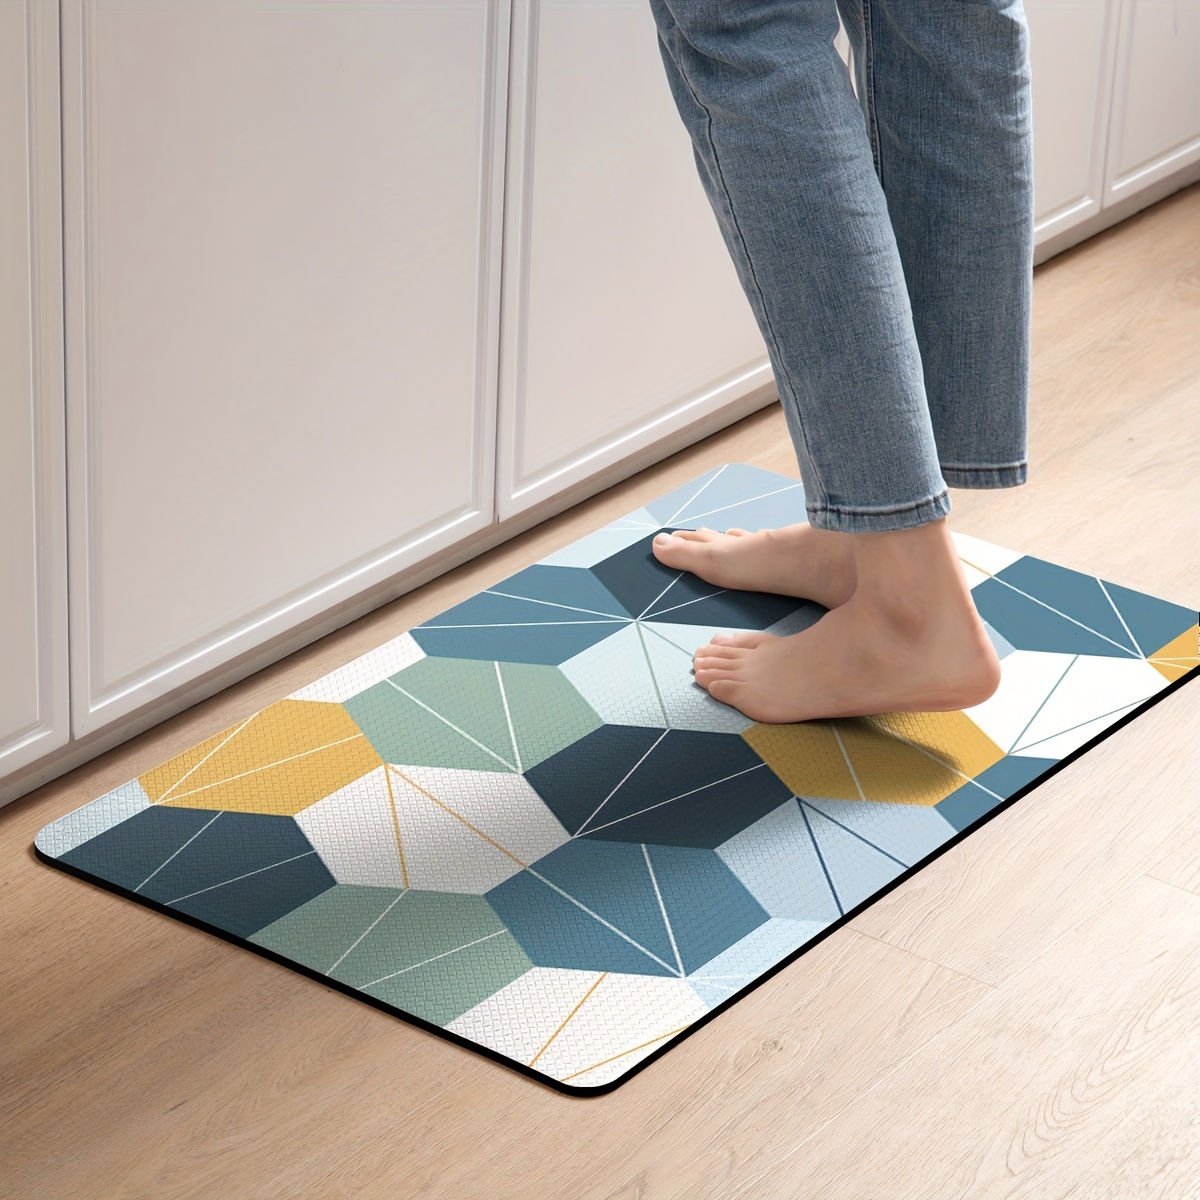 DEXI Kitchen Rugs anti Fatigue Mats for Floor Cushioned Runner Rug Non Skid  Comf